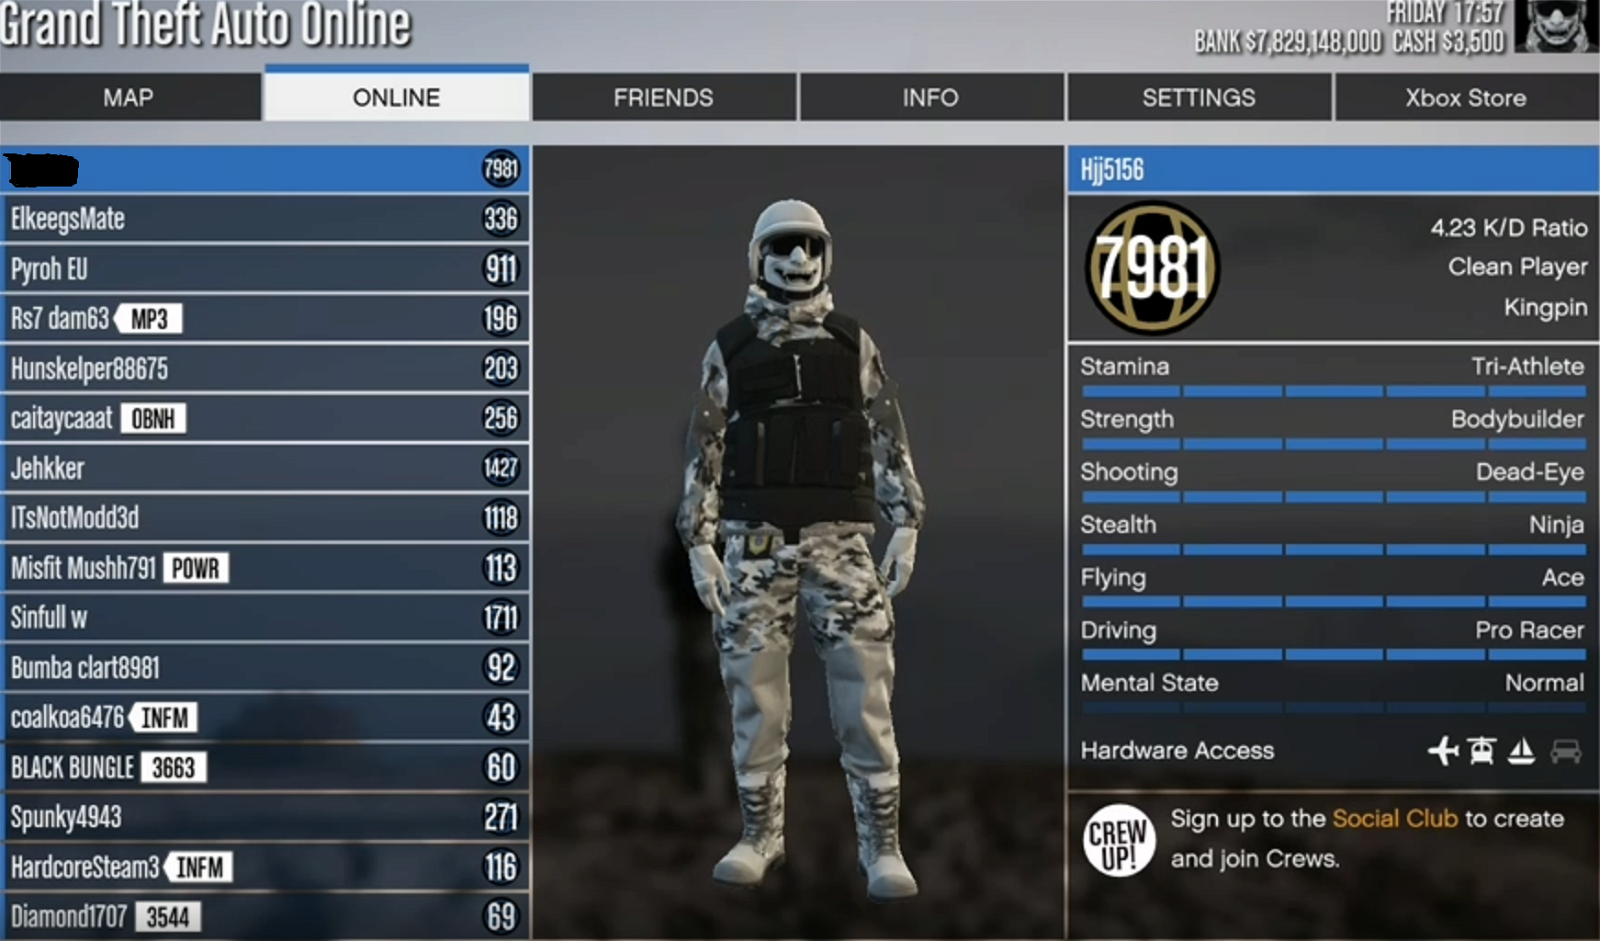 Account for xbox series X/S: 7 Billions, Fast run, 20 mod outfits and 50  full mod cars. I can show you the account in session. +150 vouches. :  r/GTA5Online